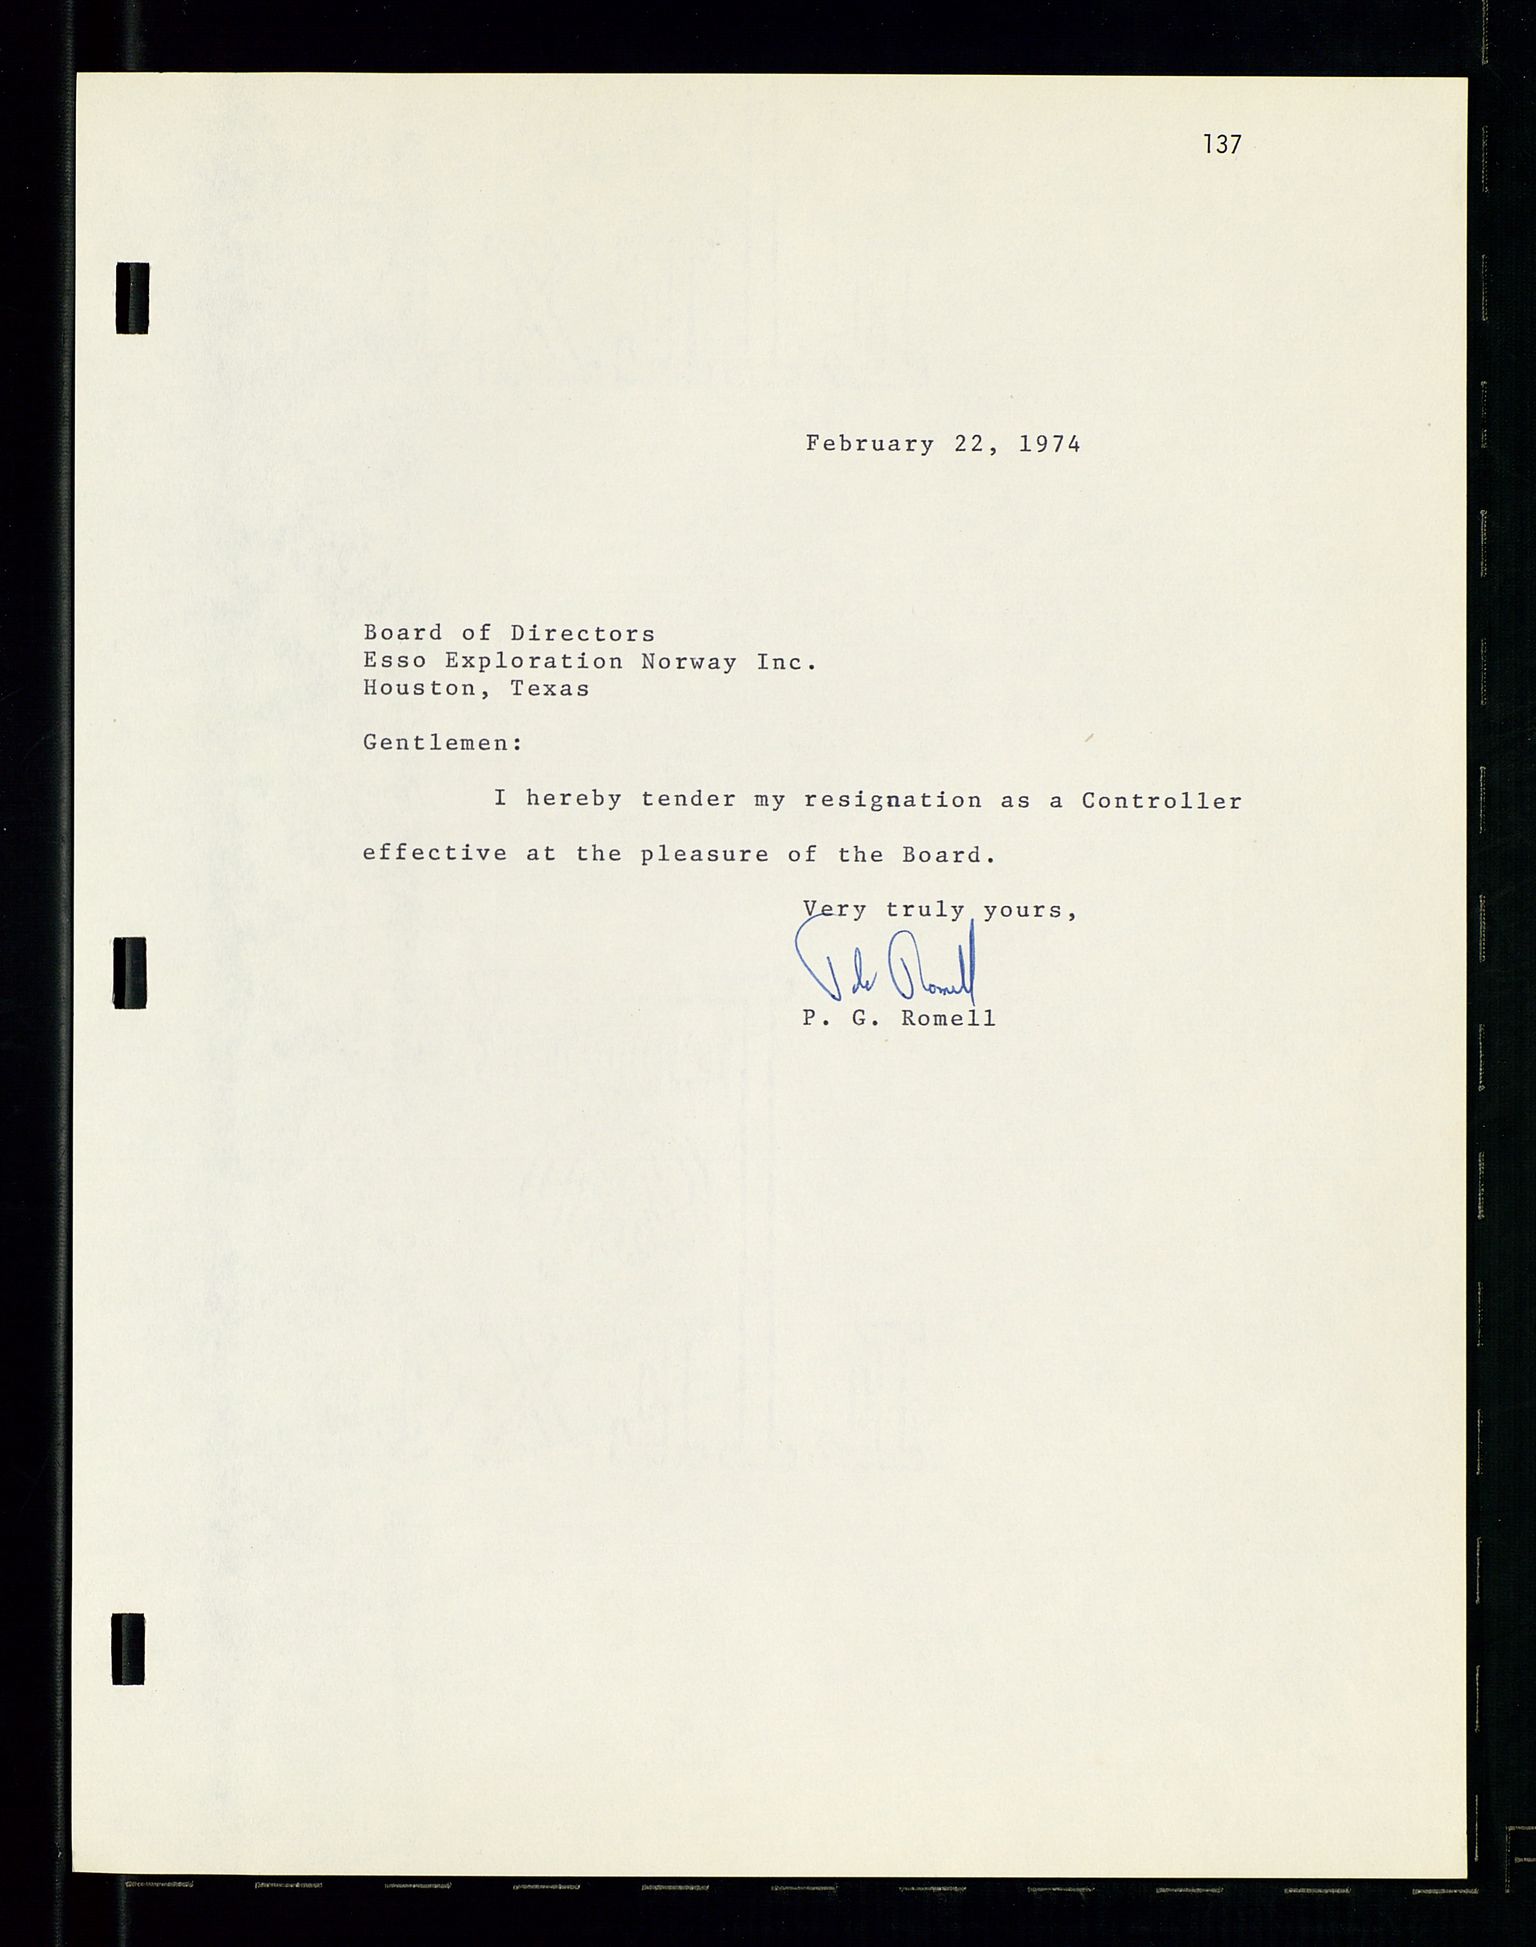 Pa 1512 - Esso Exploration and Production Norway Inc., SAST/A-101917/A/Aa/L0001/0001: Styredokumenter / Corporate records, By-Laws, Board meeting minutes, Incorporations, 1965-1975, p. 137